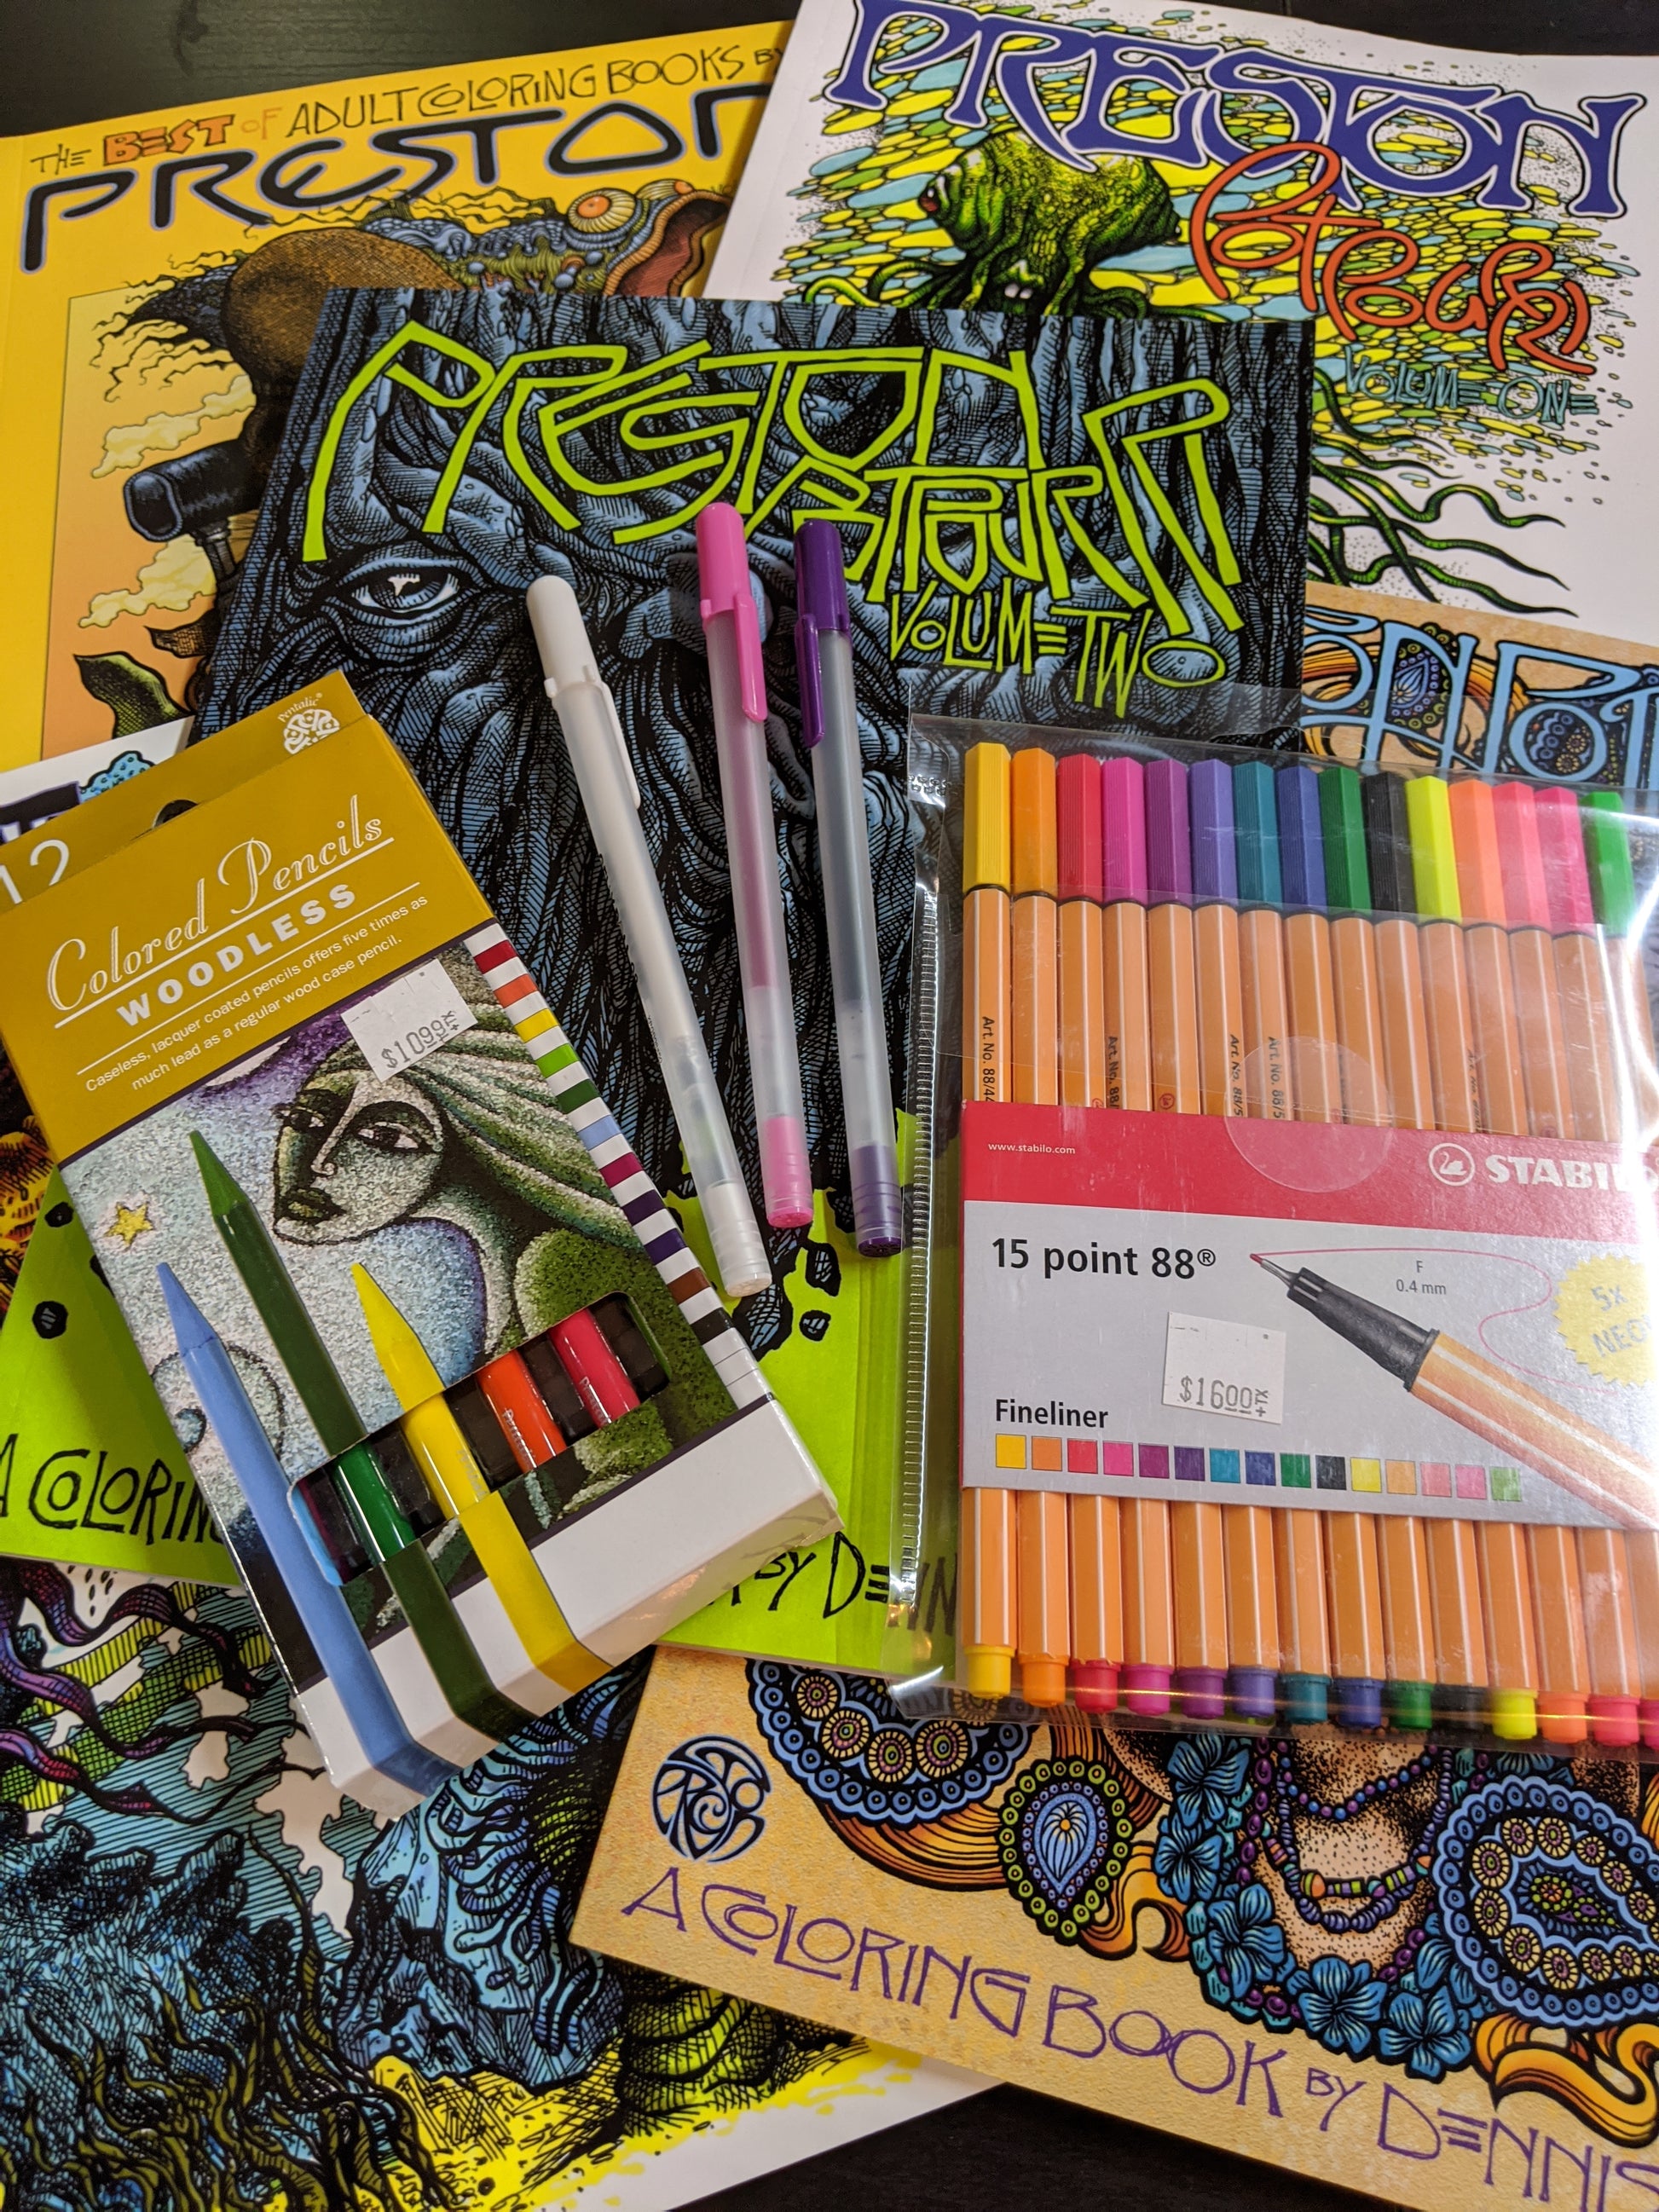 The Best Adult Coloring Books and Supplies